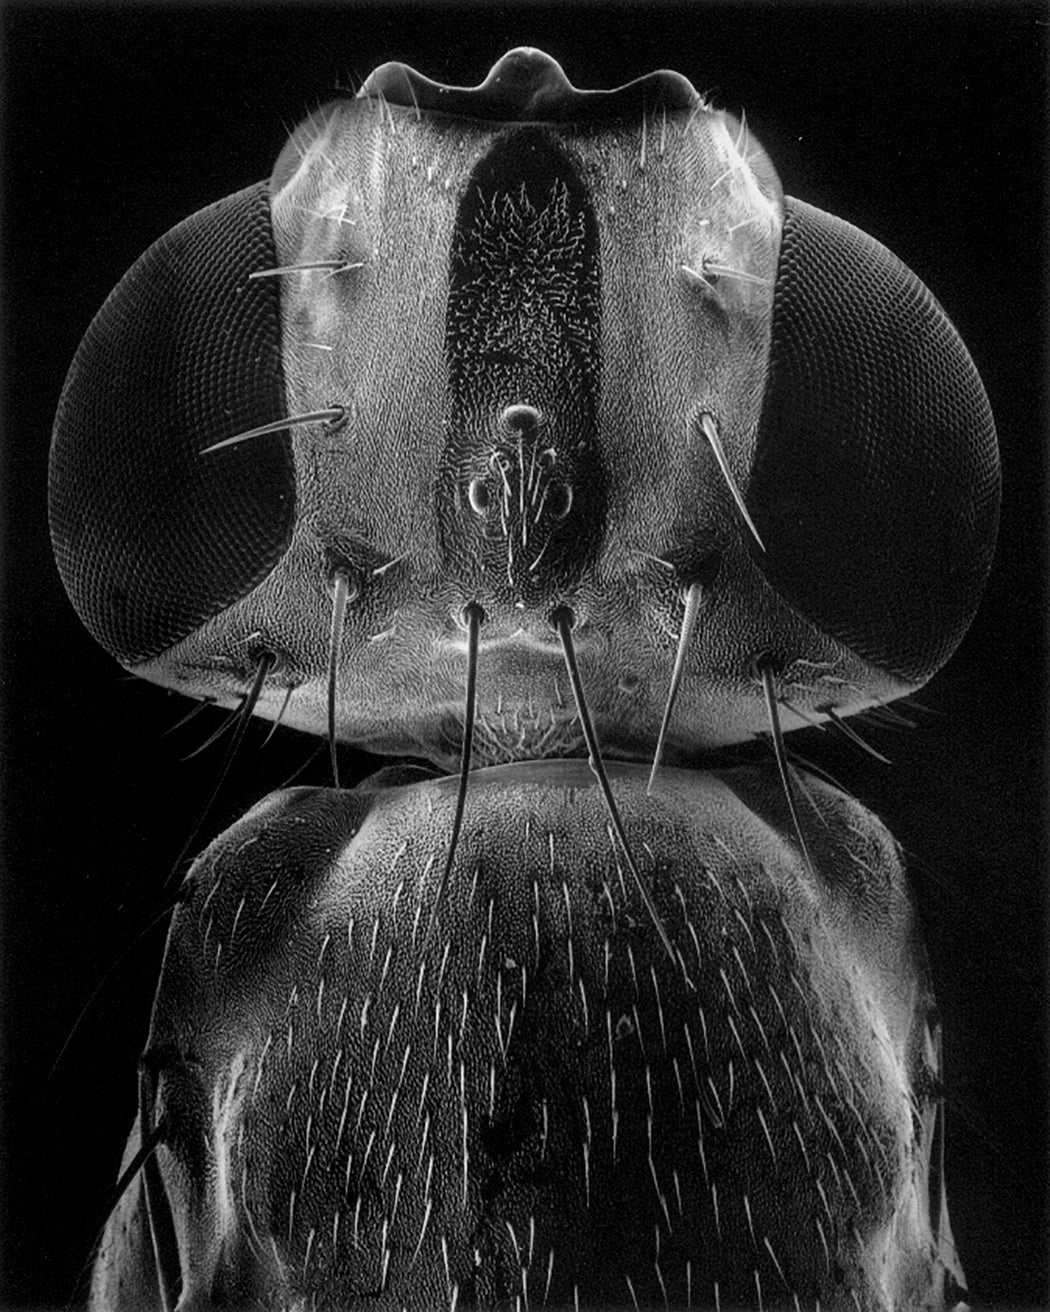 11-02-7 Head of a fly, 50x